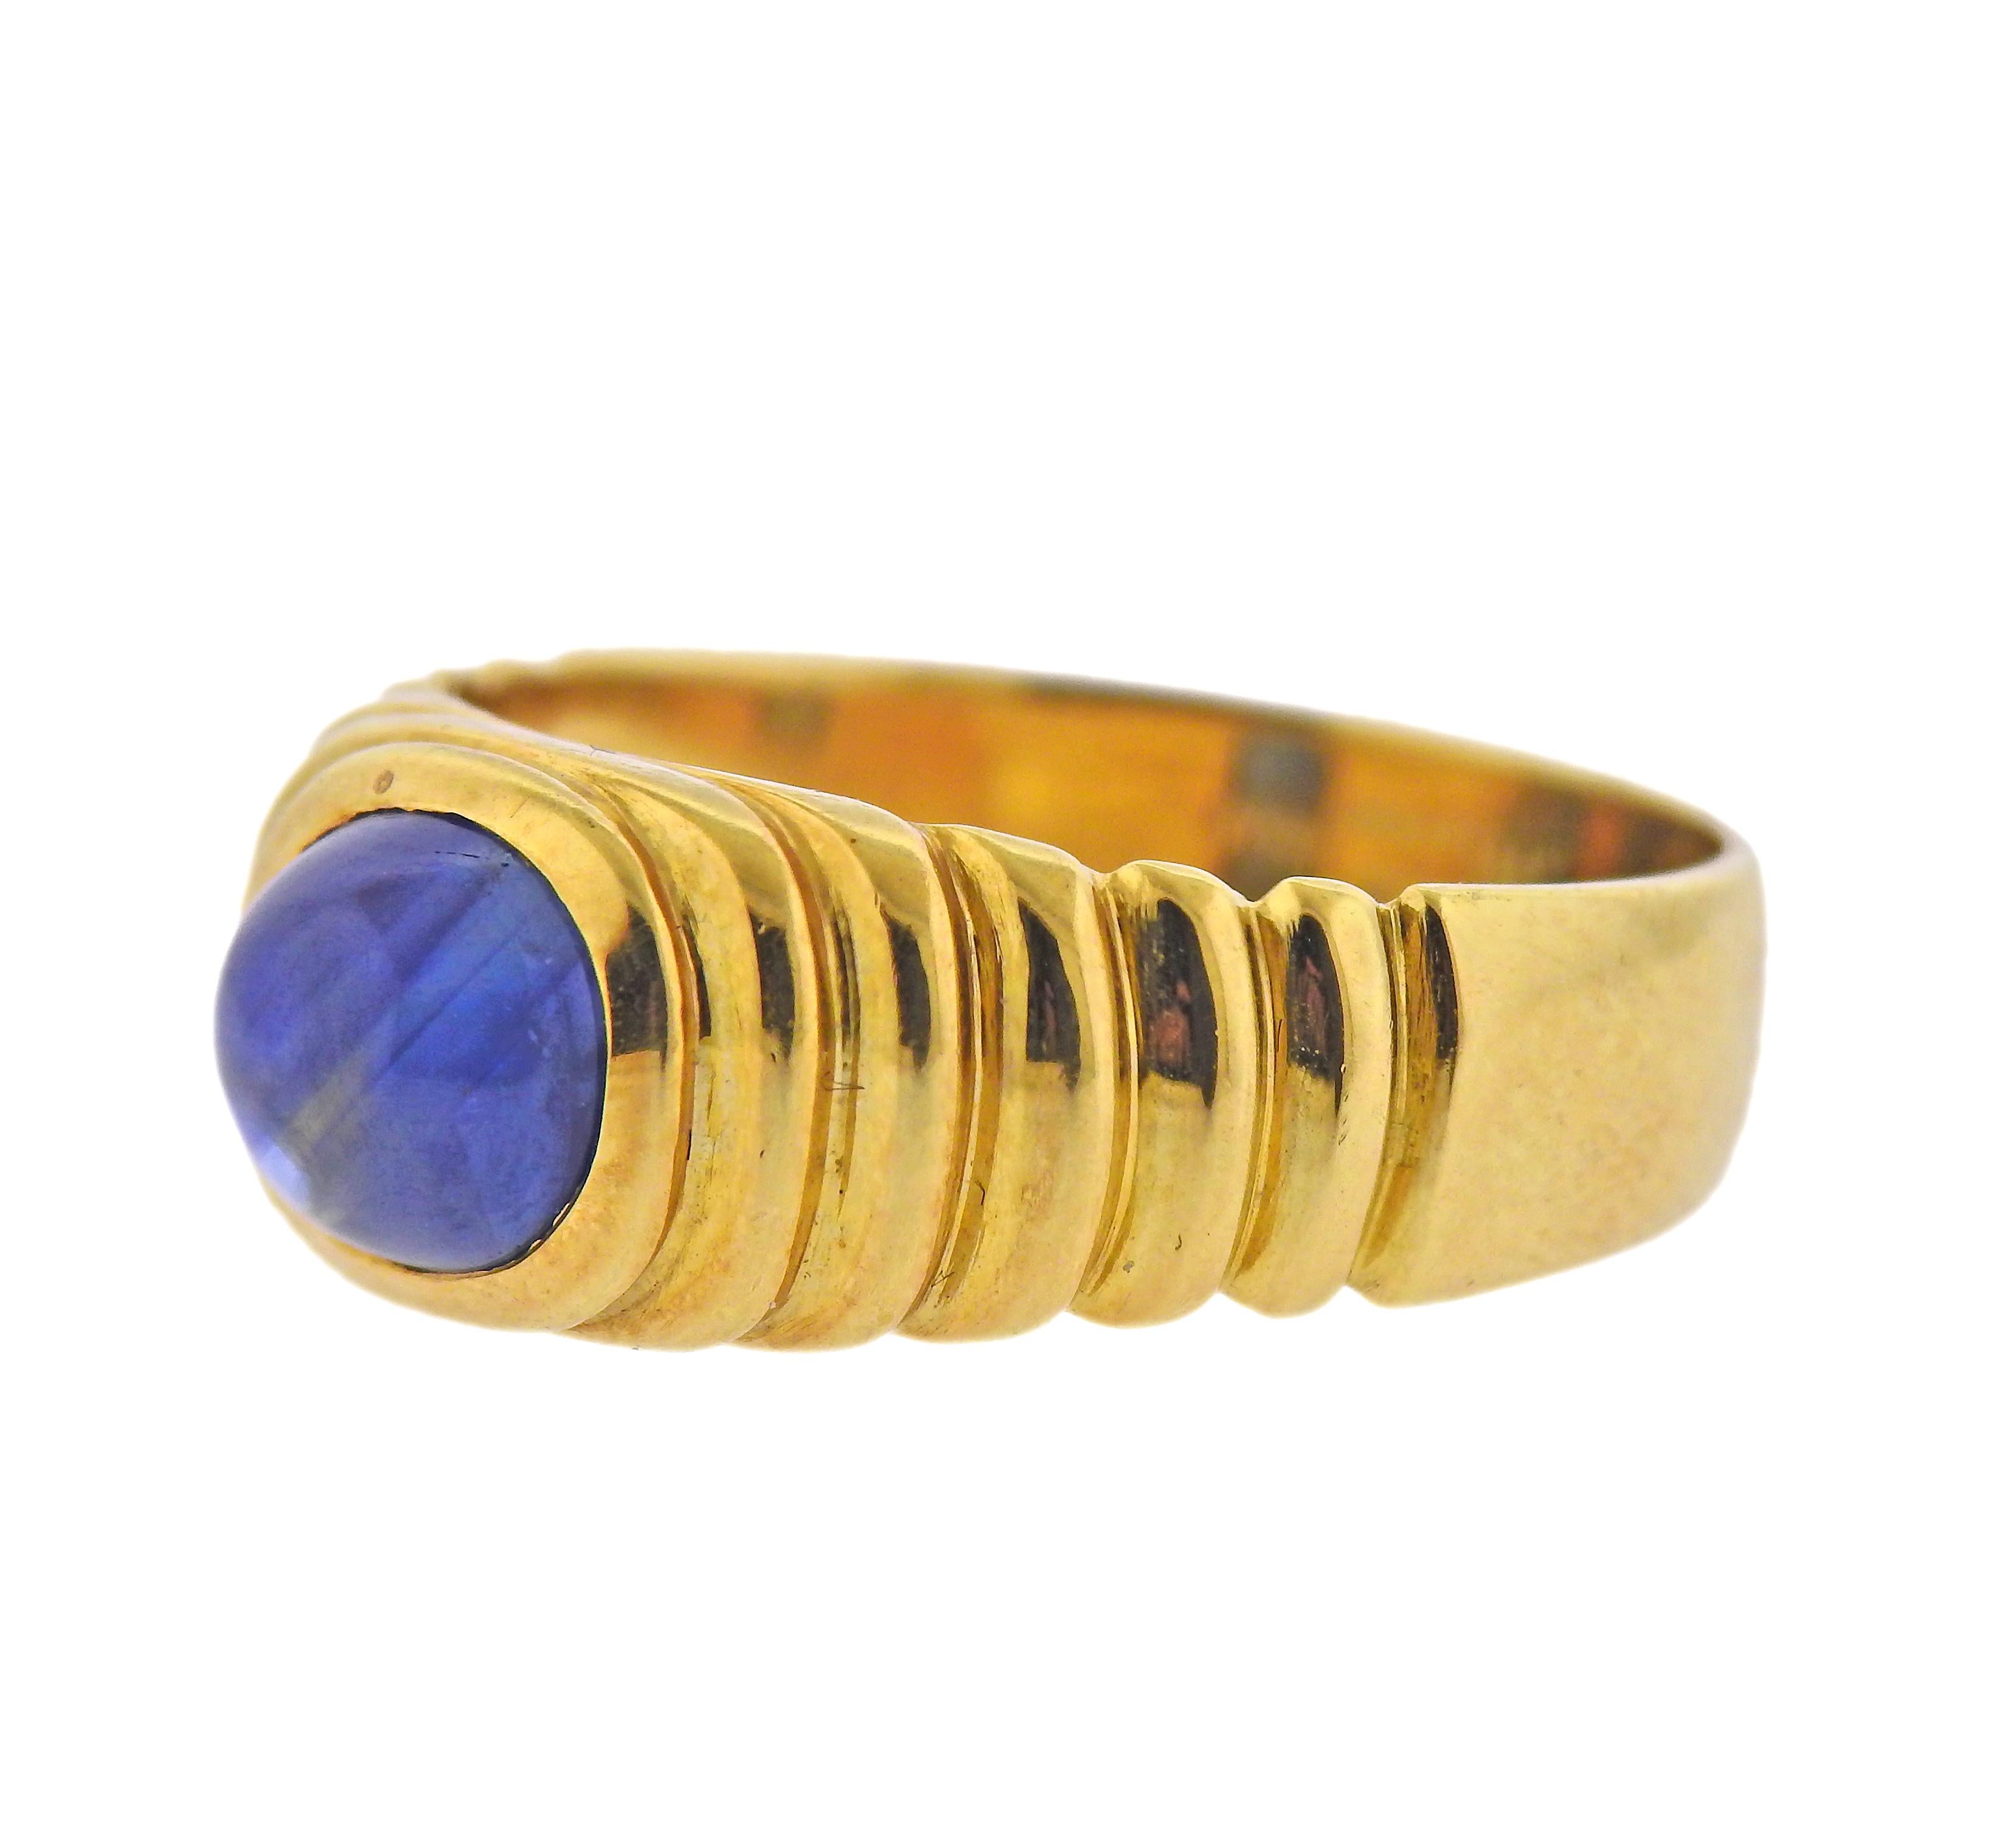 18k yellow gold ring by Leo Pizzo, with 6.9mm x 8mm sapphire cabochon. Ring size - 9, ring top is 9mm wide. Marked: Leo Pizzo, 750, Italian mark. Weight - 7.6 grams. 